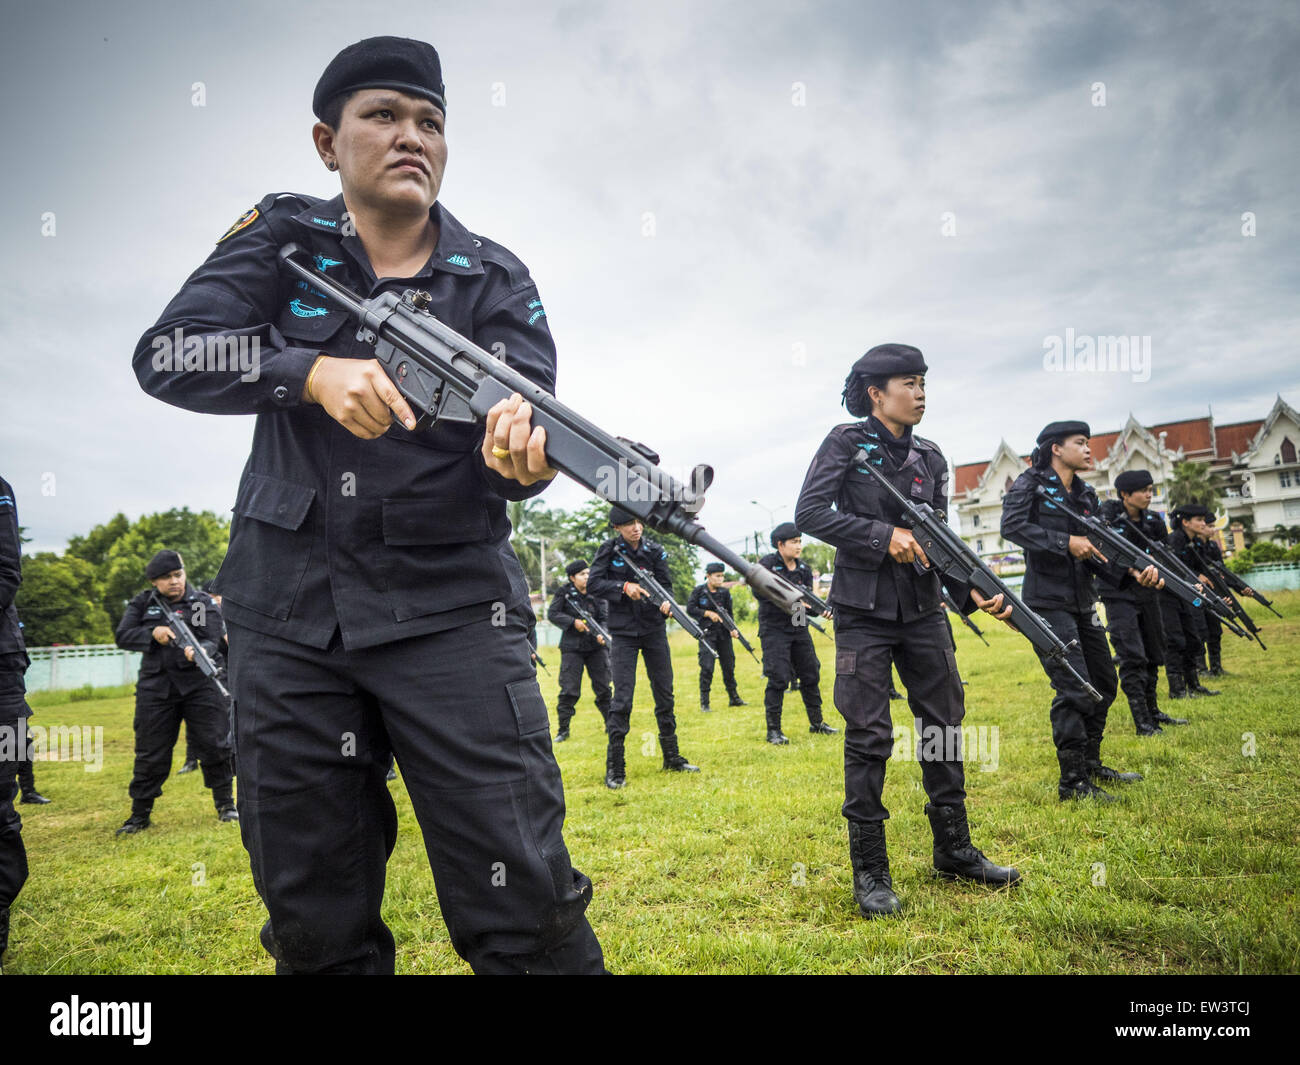 June 17, 2015 - Rangae, Narathiwat, Thailand - Thai women Rangers drill with HK33 Assault Rifles. There are 5 platoons of women Rangers serving in Thailand's restive Deep South. They generally perform security missions at large public events and do public outreach missions, like home wellness checks and delivering food and medicine into rural communities. The medics frequently work in civilian clothes because the Rangers found people are more relaxed around them when they're in civilian clothes. About 6,000 people have been killed in sectarian violence in Thailand's three southern provinces of Stock Photo